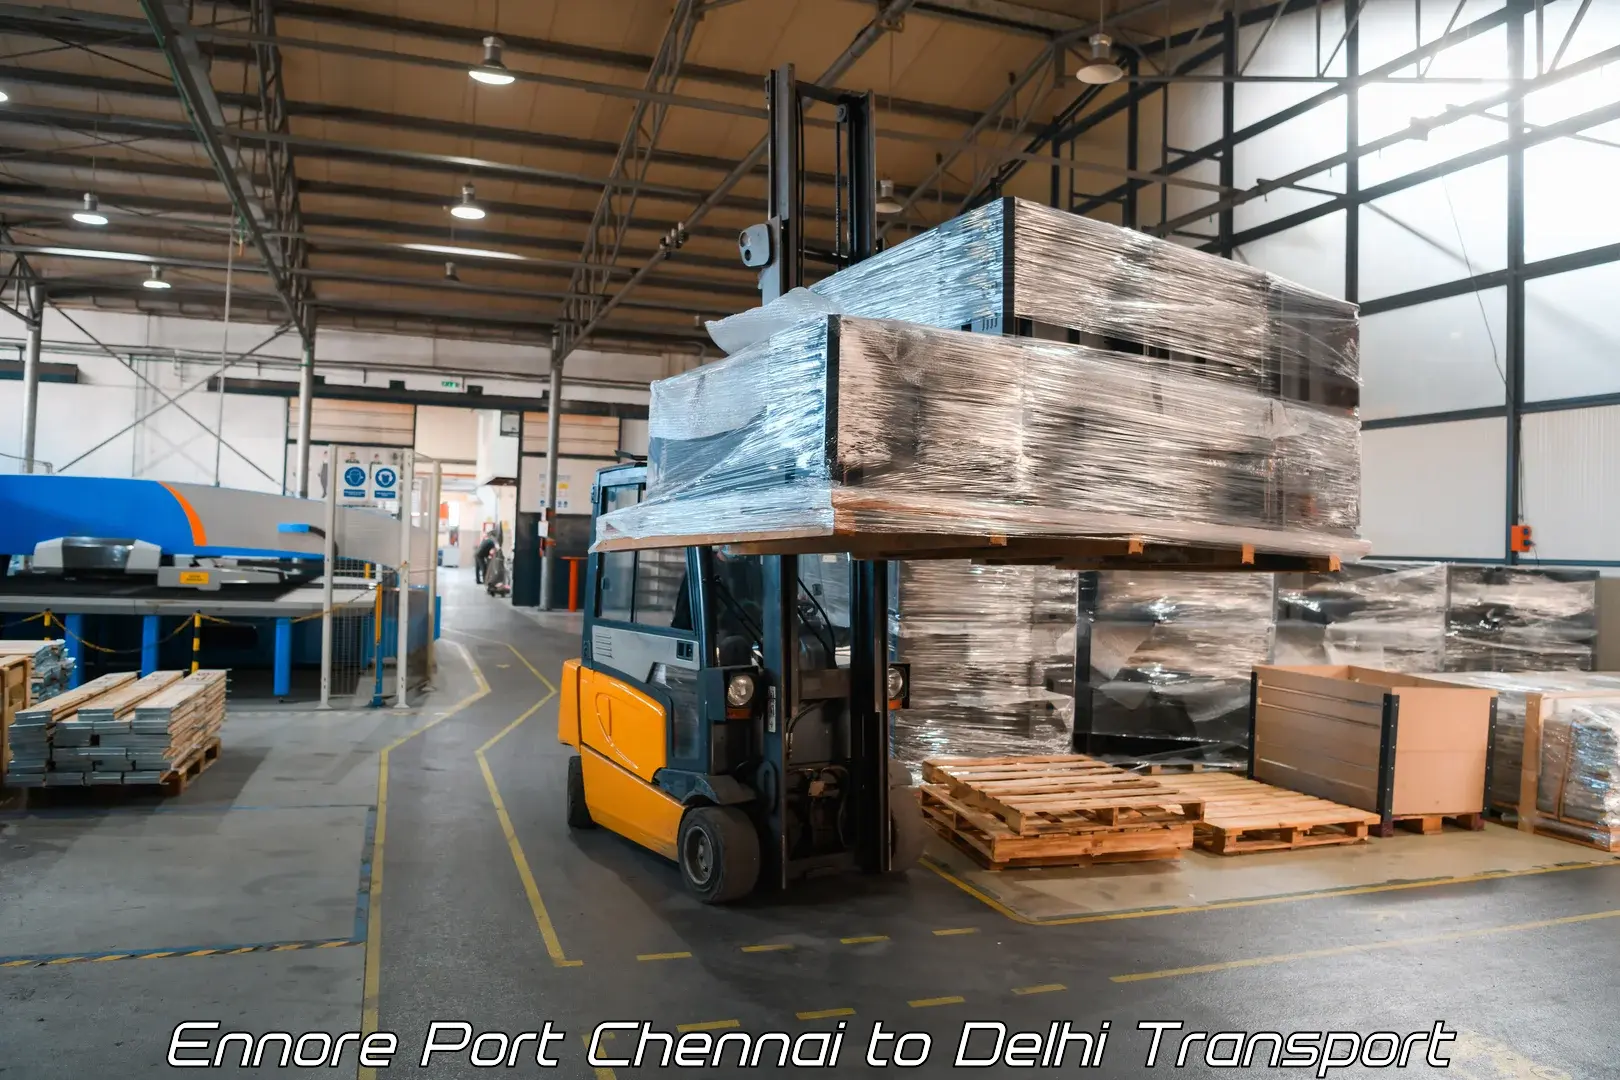 Delivery service Ennore Port Chennai to NCR